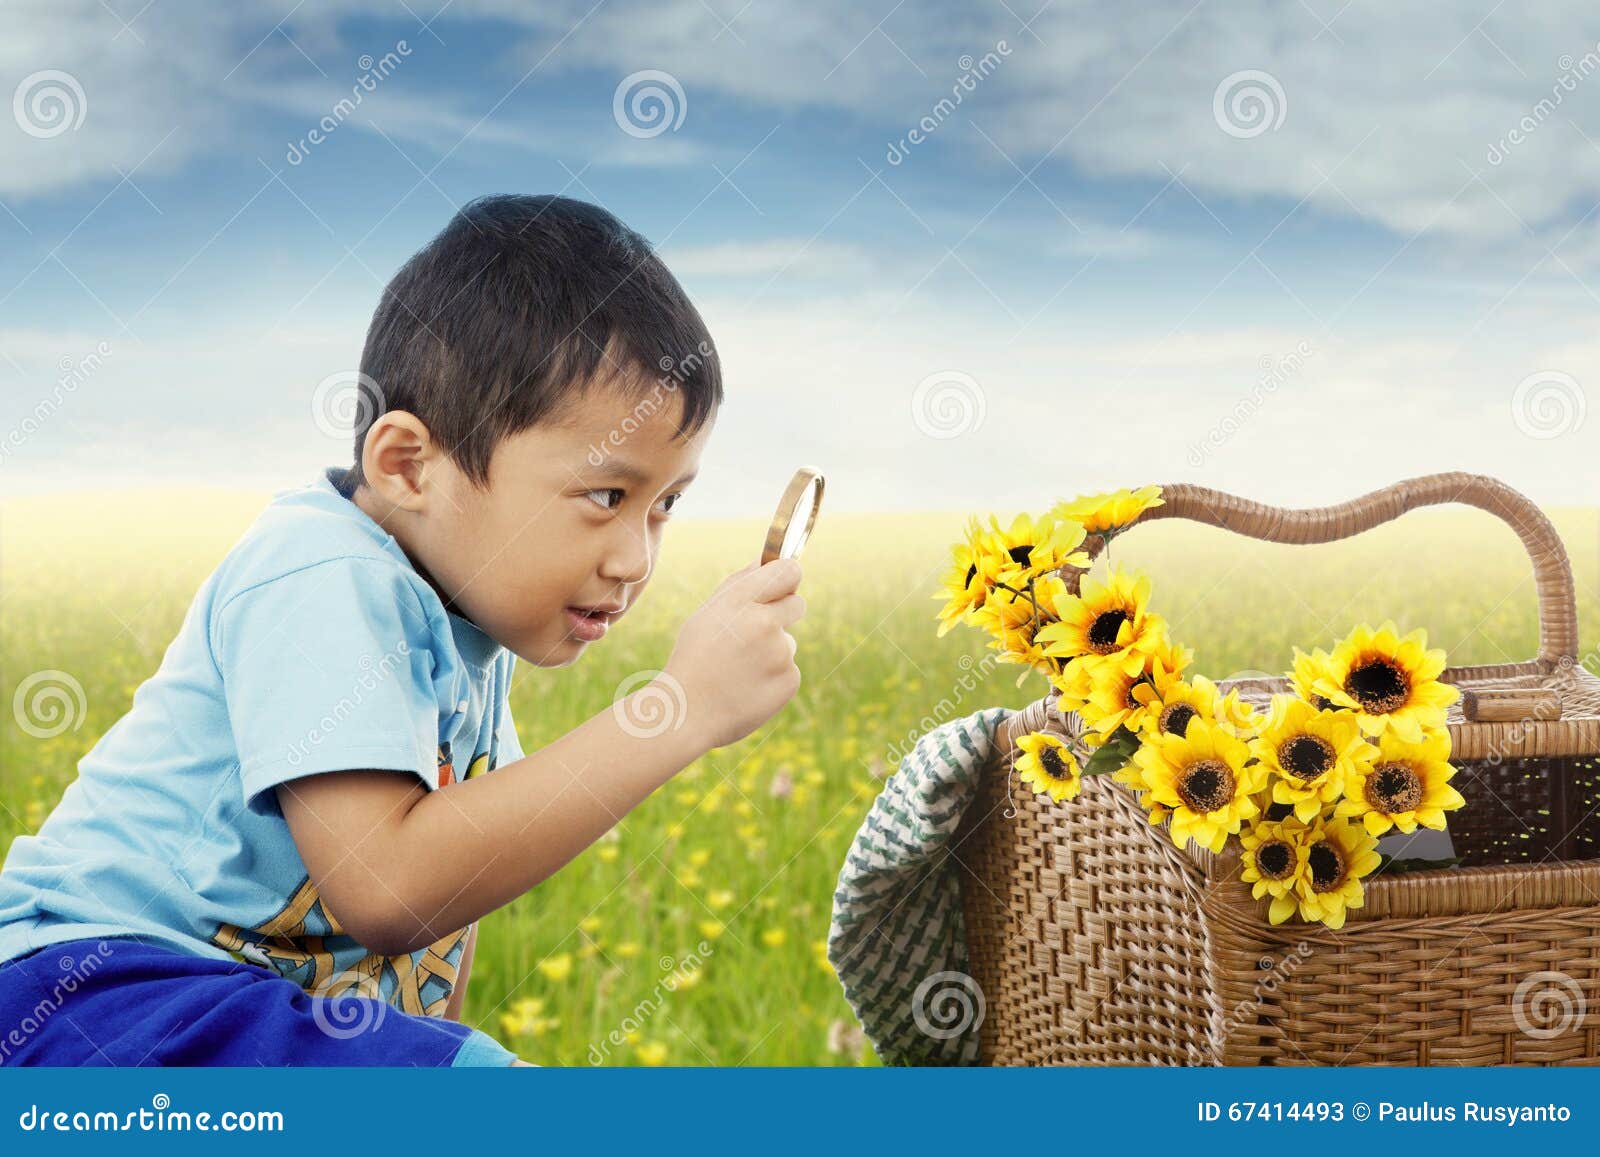 child observe flowers with magnifying glass